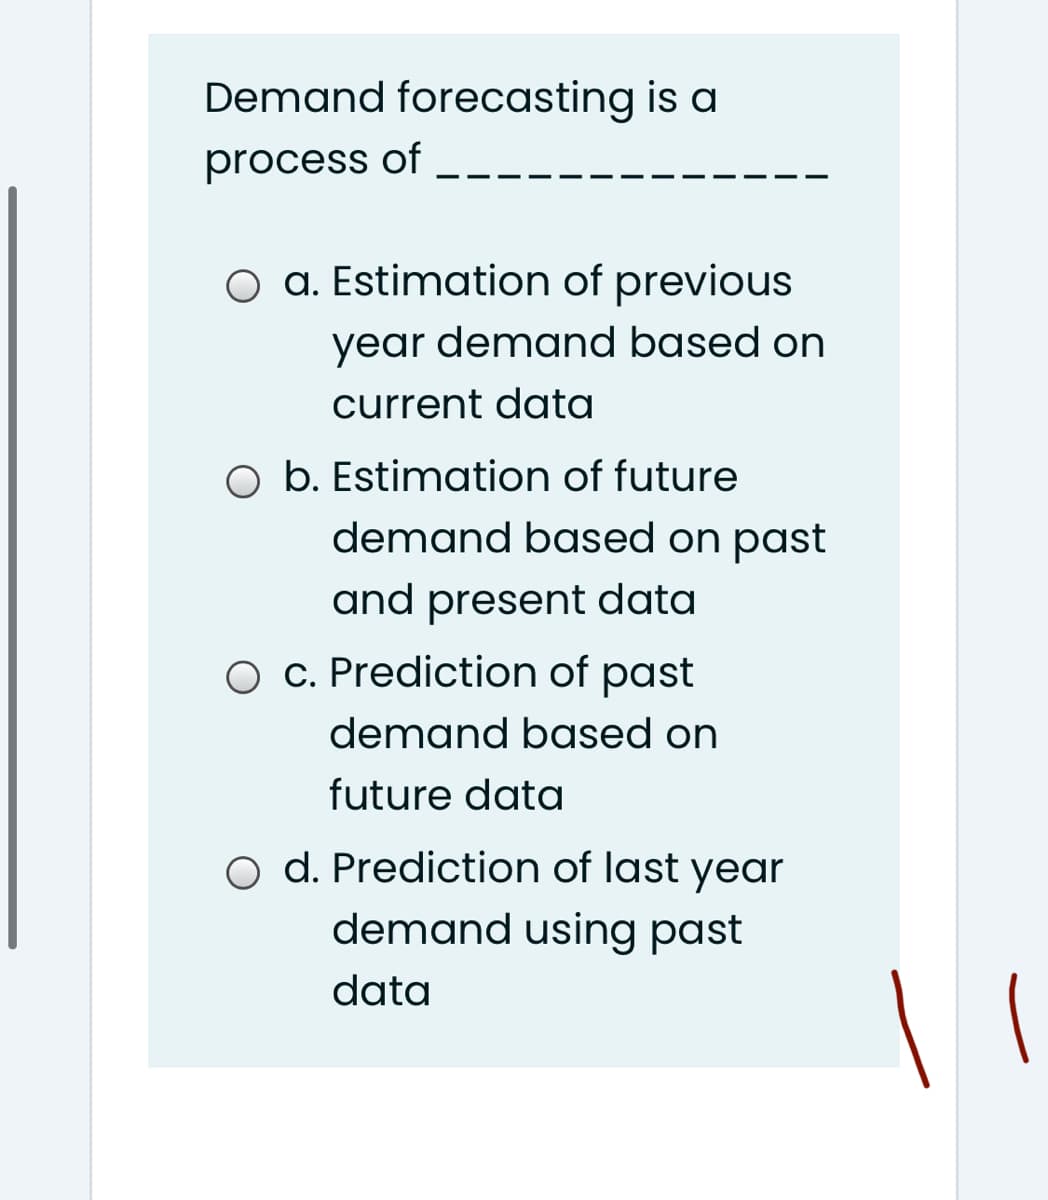 Demand forecasting is a
process of
O a. Estimation of previous
year demand based on
current data
b. Estimation of future
demand based on past
and present data
O c. Prediction of past
demand based on
future data
o d. Prediction of last year
demand using past
data
